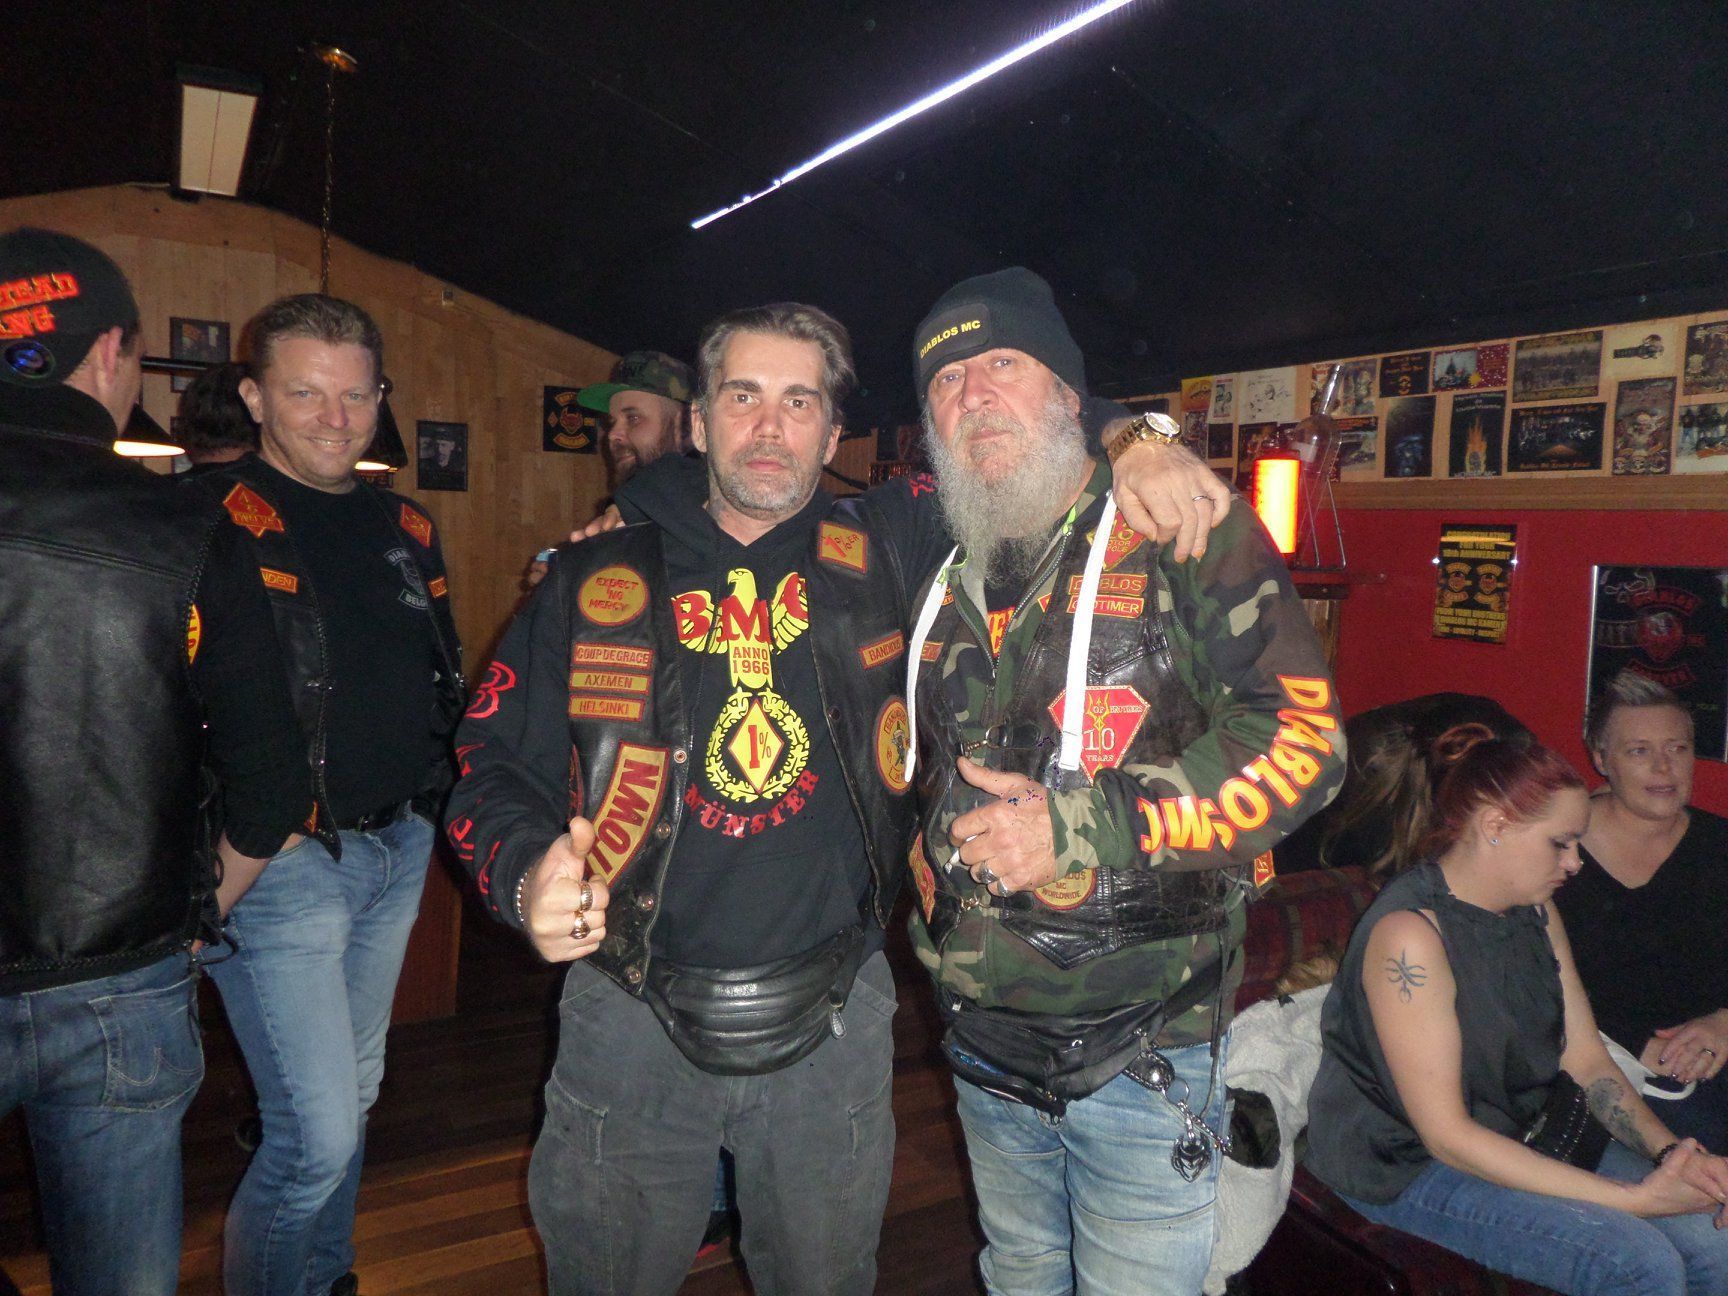 15 Little-Known Facts About The Diablos Motorcycle Club